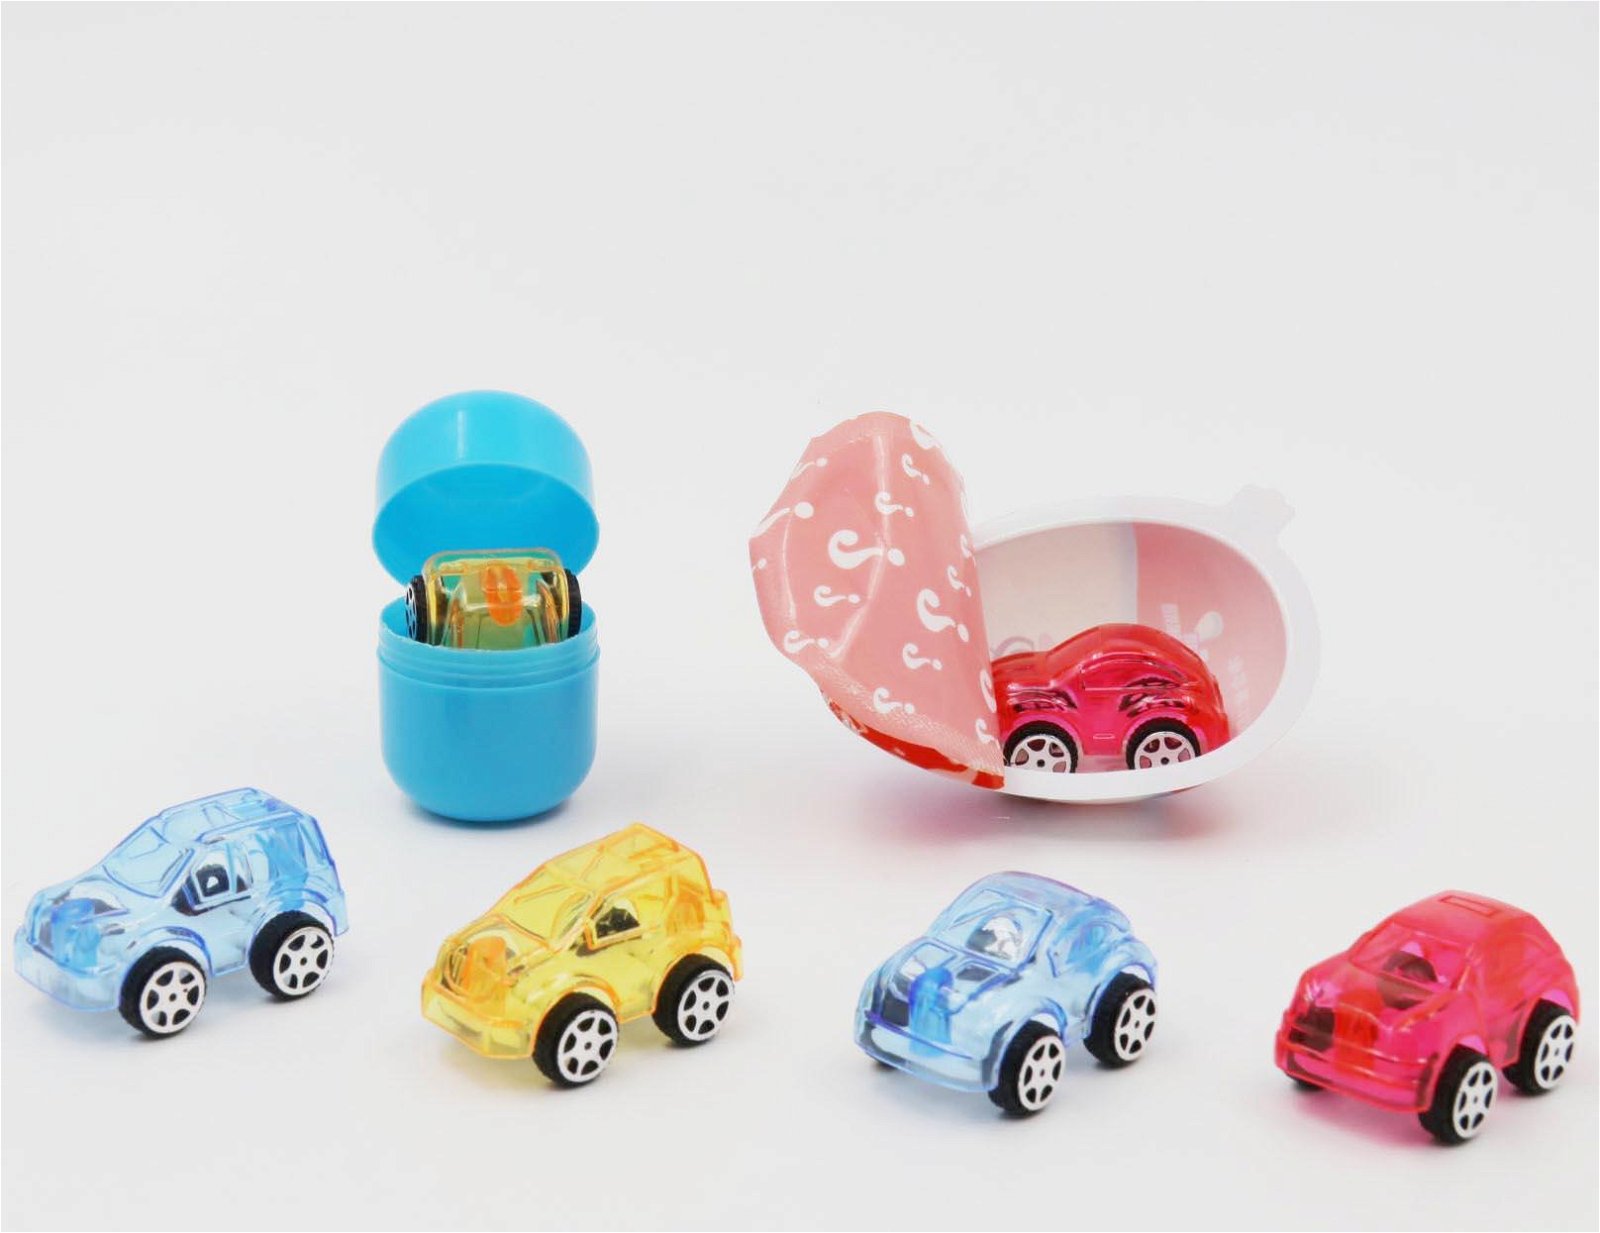 Cartoon plastic made capsule toy colourful slide motorcycle toy for surprise egg 2